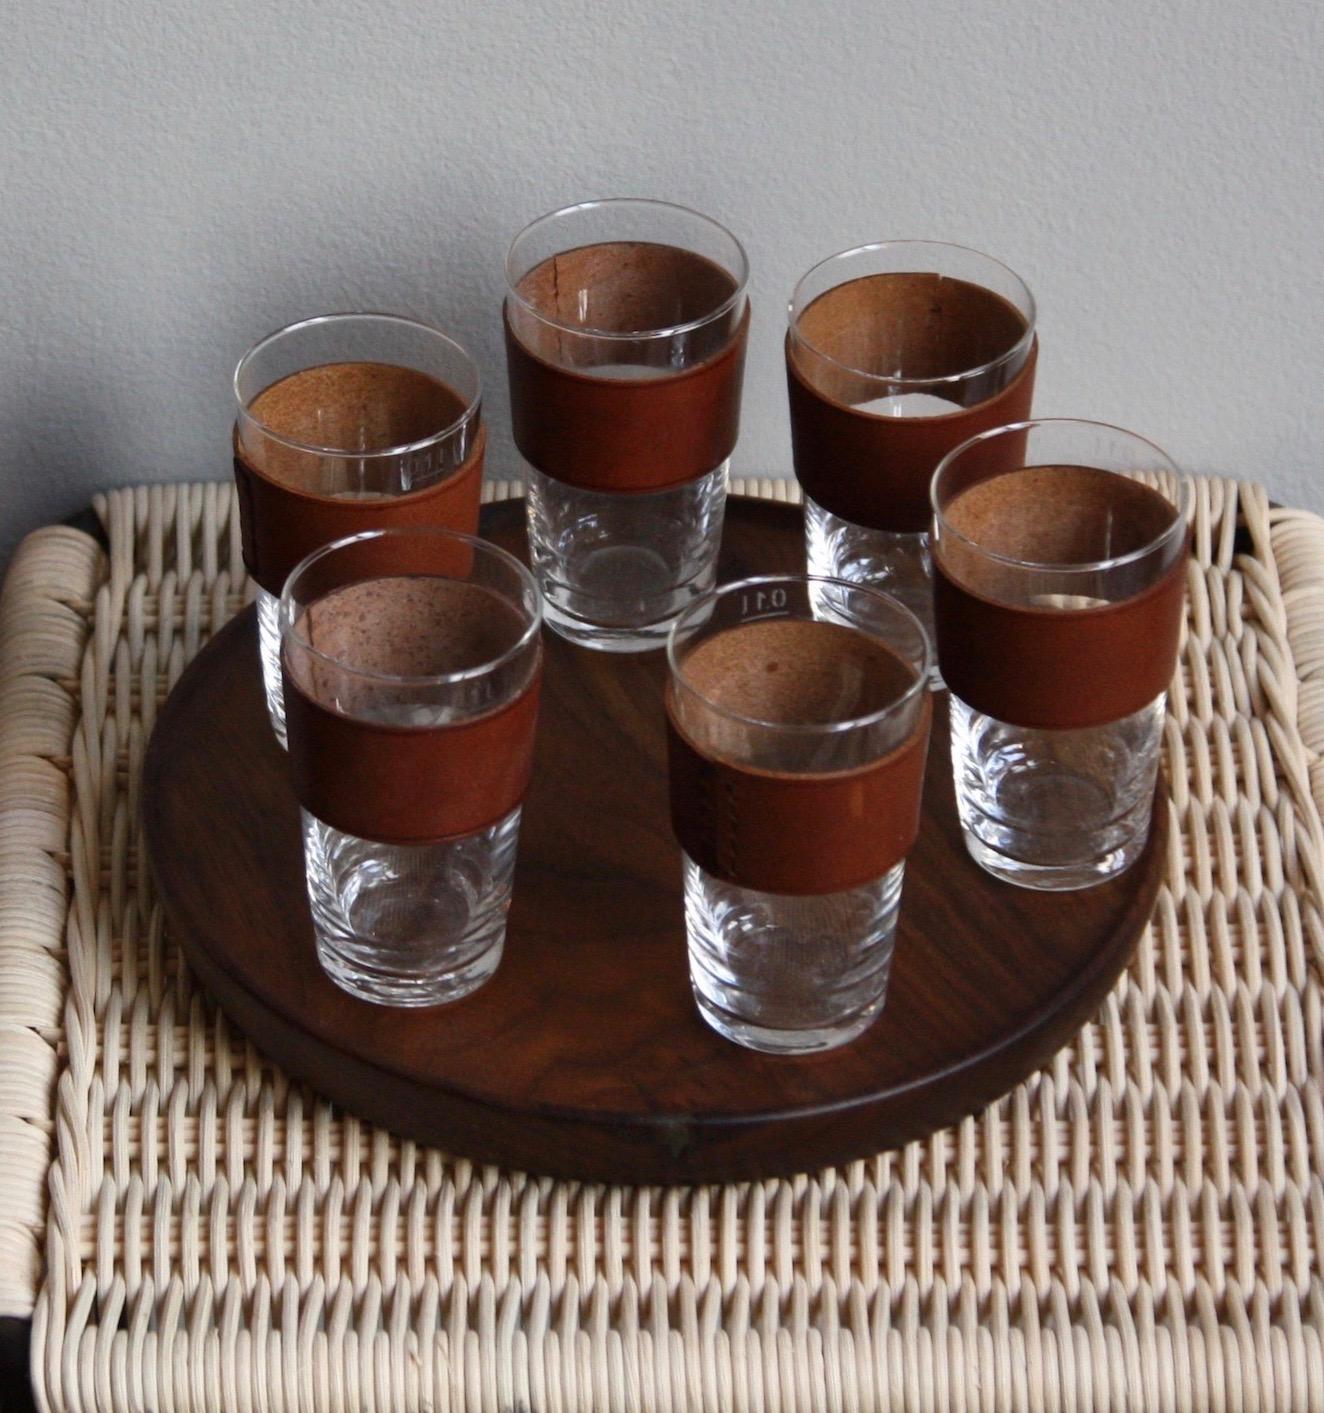 A vintage, completely original, schnapps set designed and made by Carl Auböck II, Vienna, circa 1950. The set consists of a walnut board and six glasses. Each glass is made of hand blown glass with a very high lead content which gives the glass